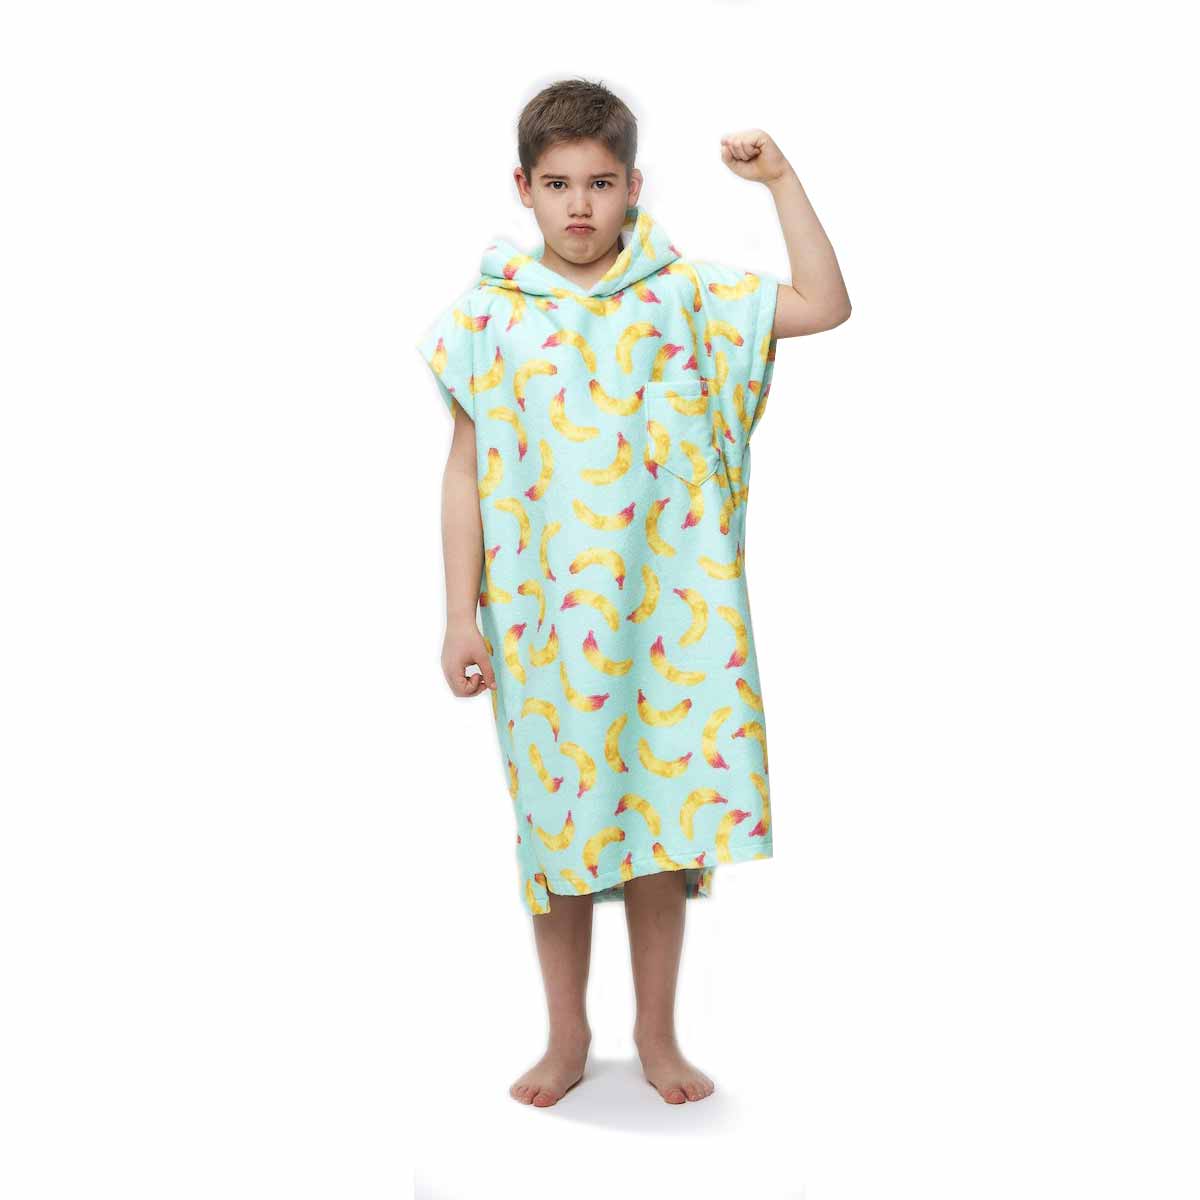 After Essentials Kids Poncho Towel – Banana Stain